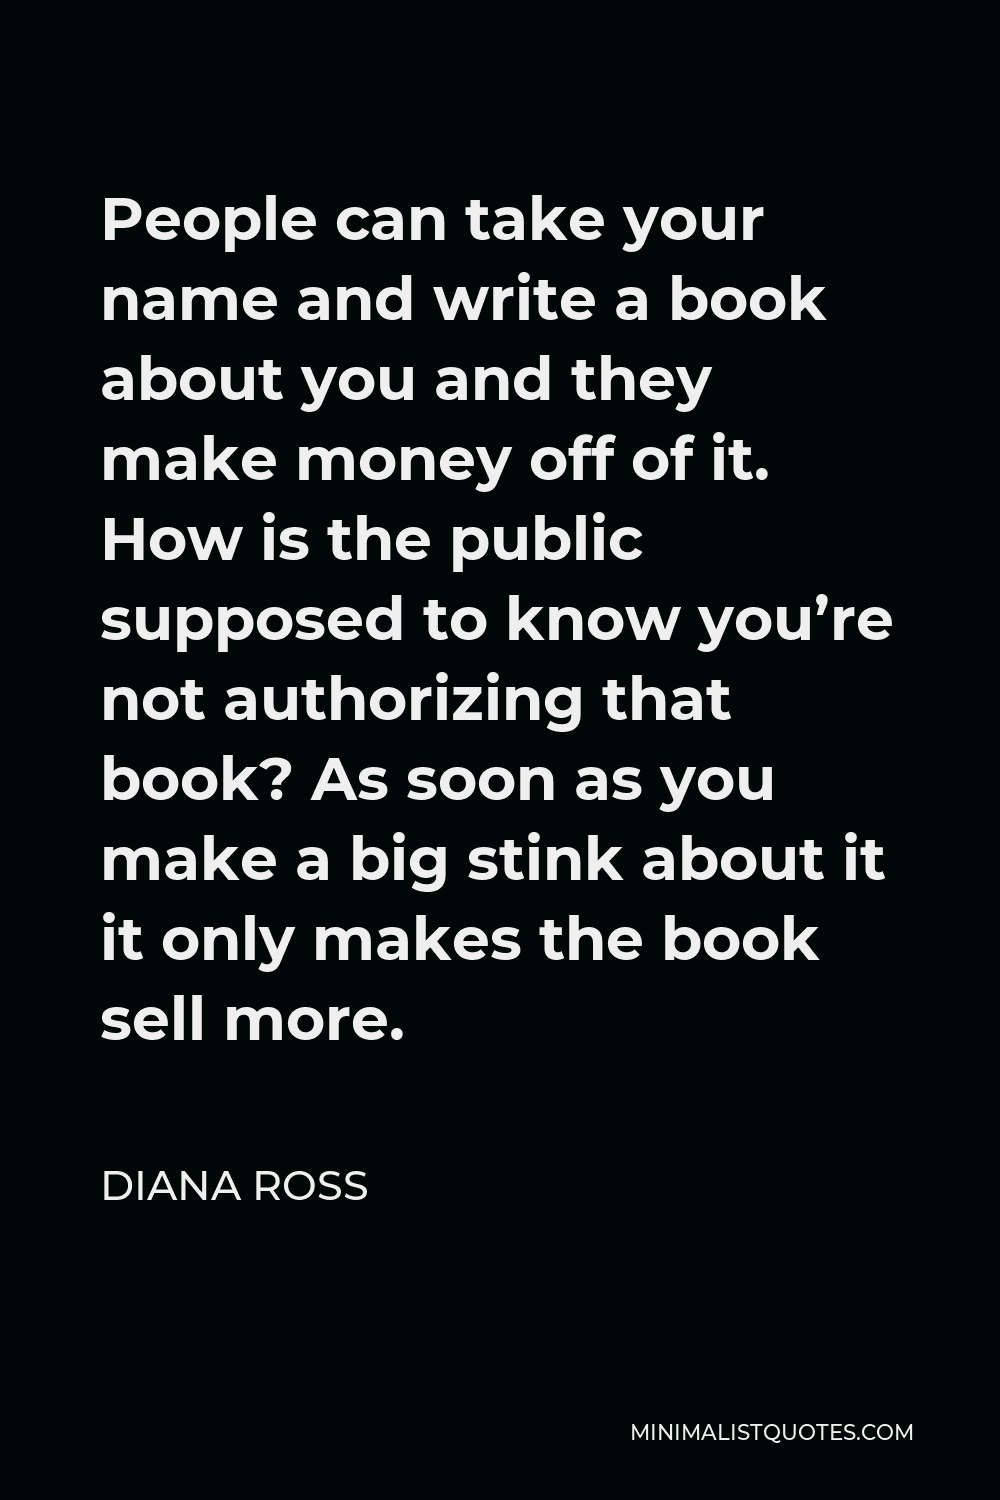 Diana Ross Quote - People can take your name and write a book about you and they make money off of it. How is the public supposed to know you’re not authorizing that book? As soon as you make a big stink about it it only makes the book sell more.